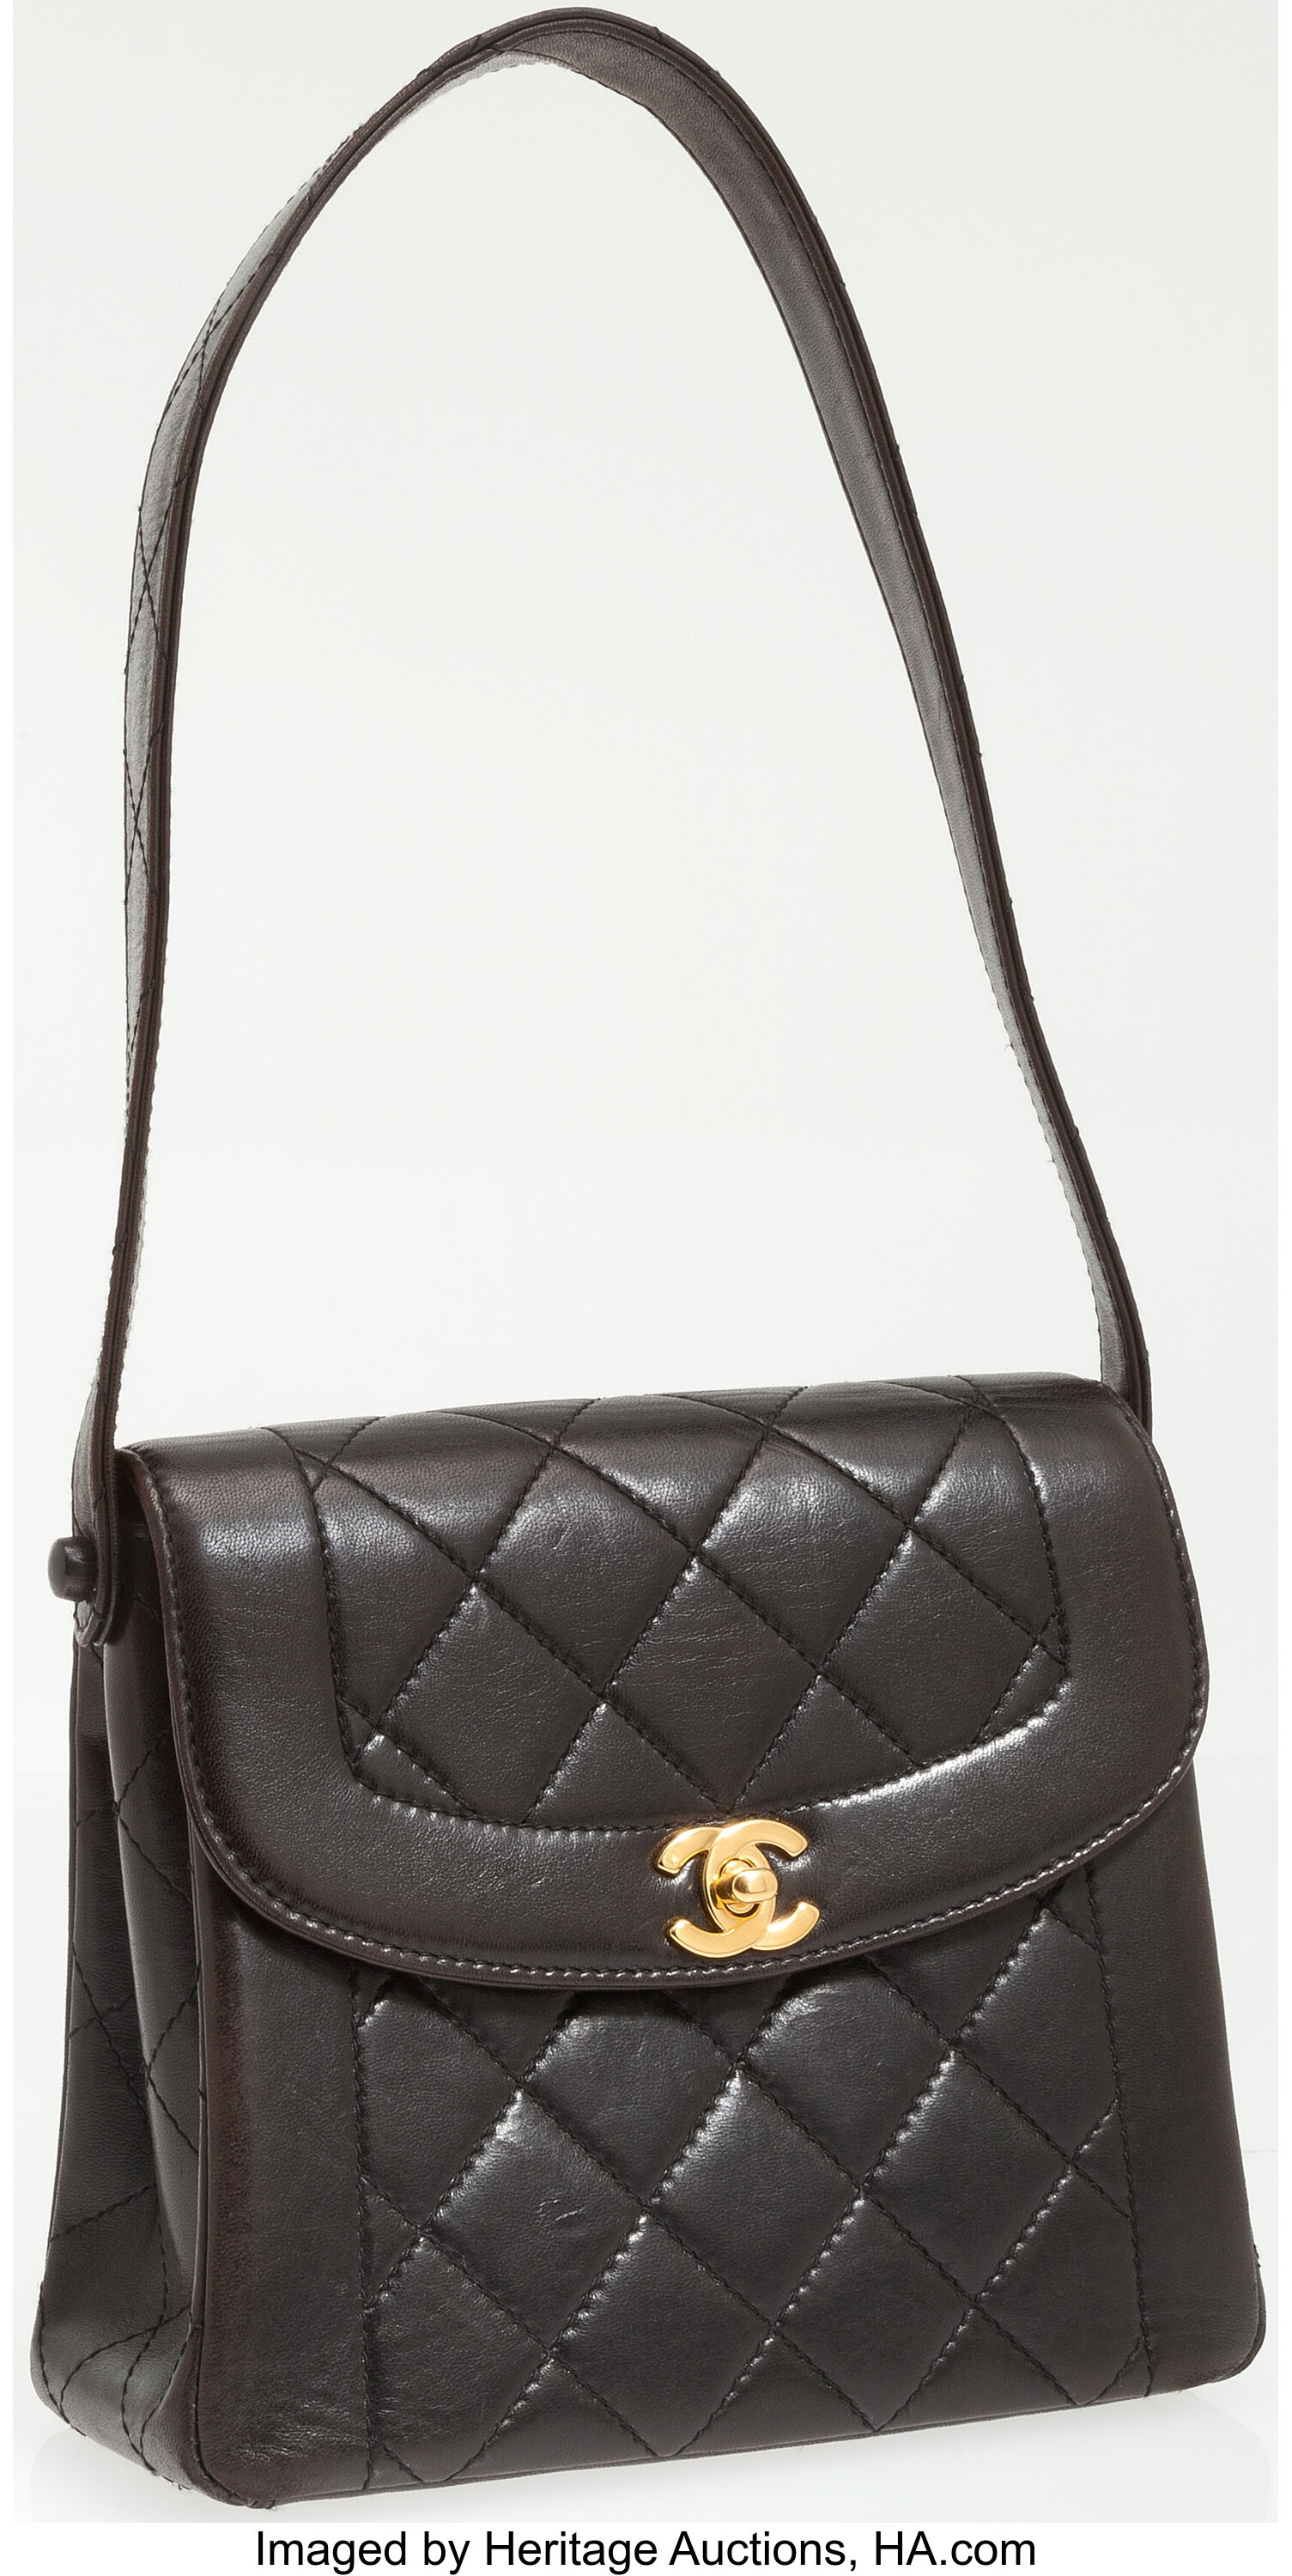 Chanel Black Lambskin Leather Turnlock Small Tote Bag.  Luxury